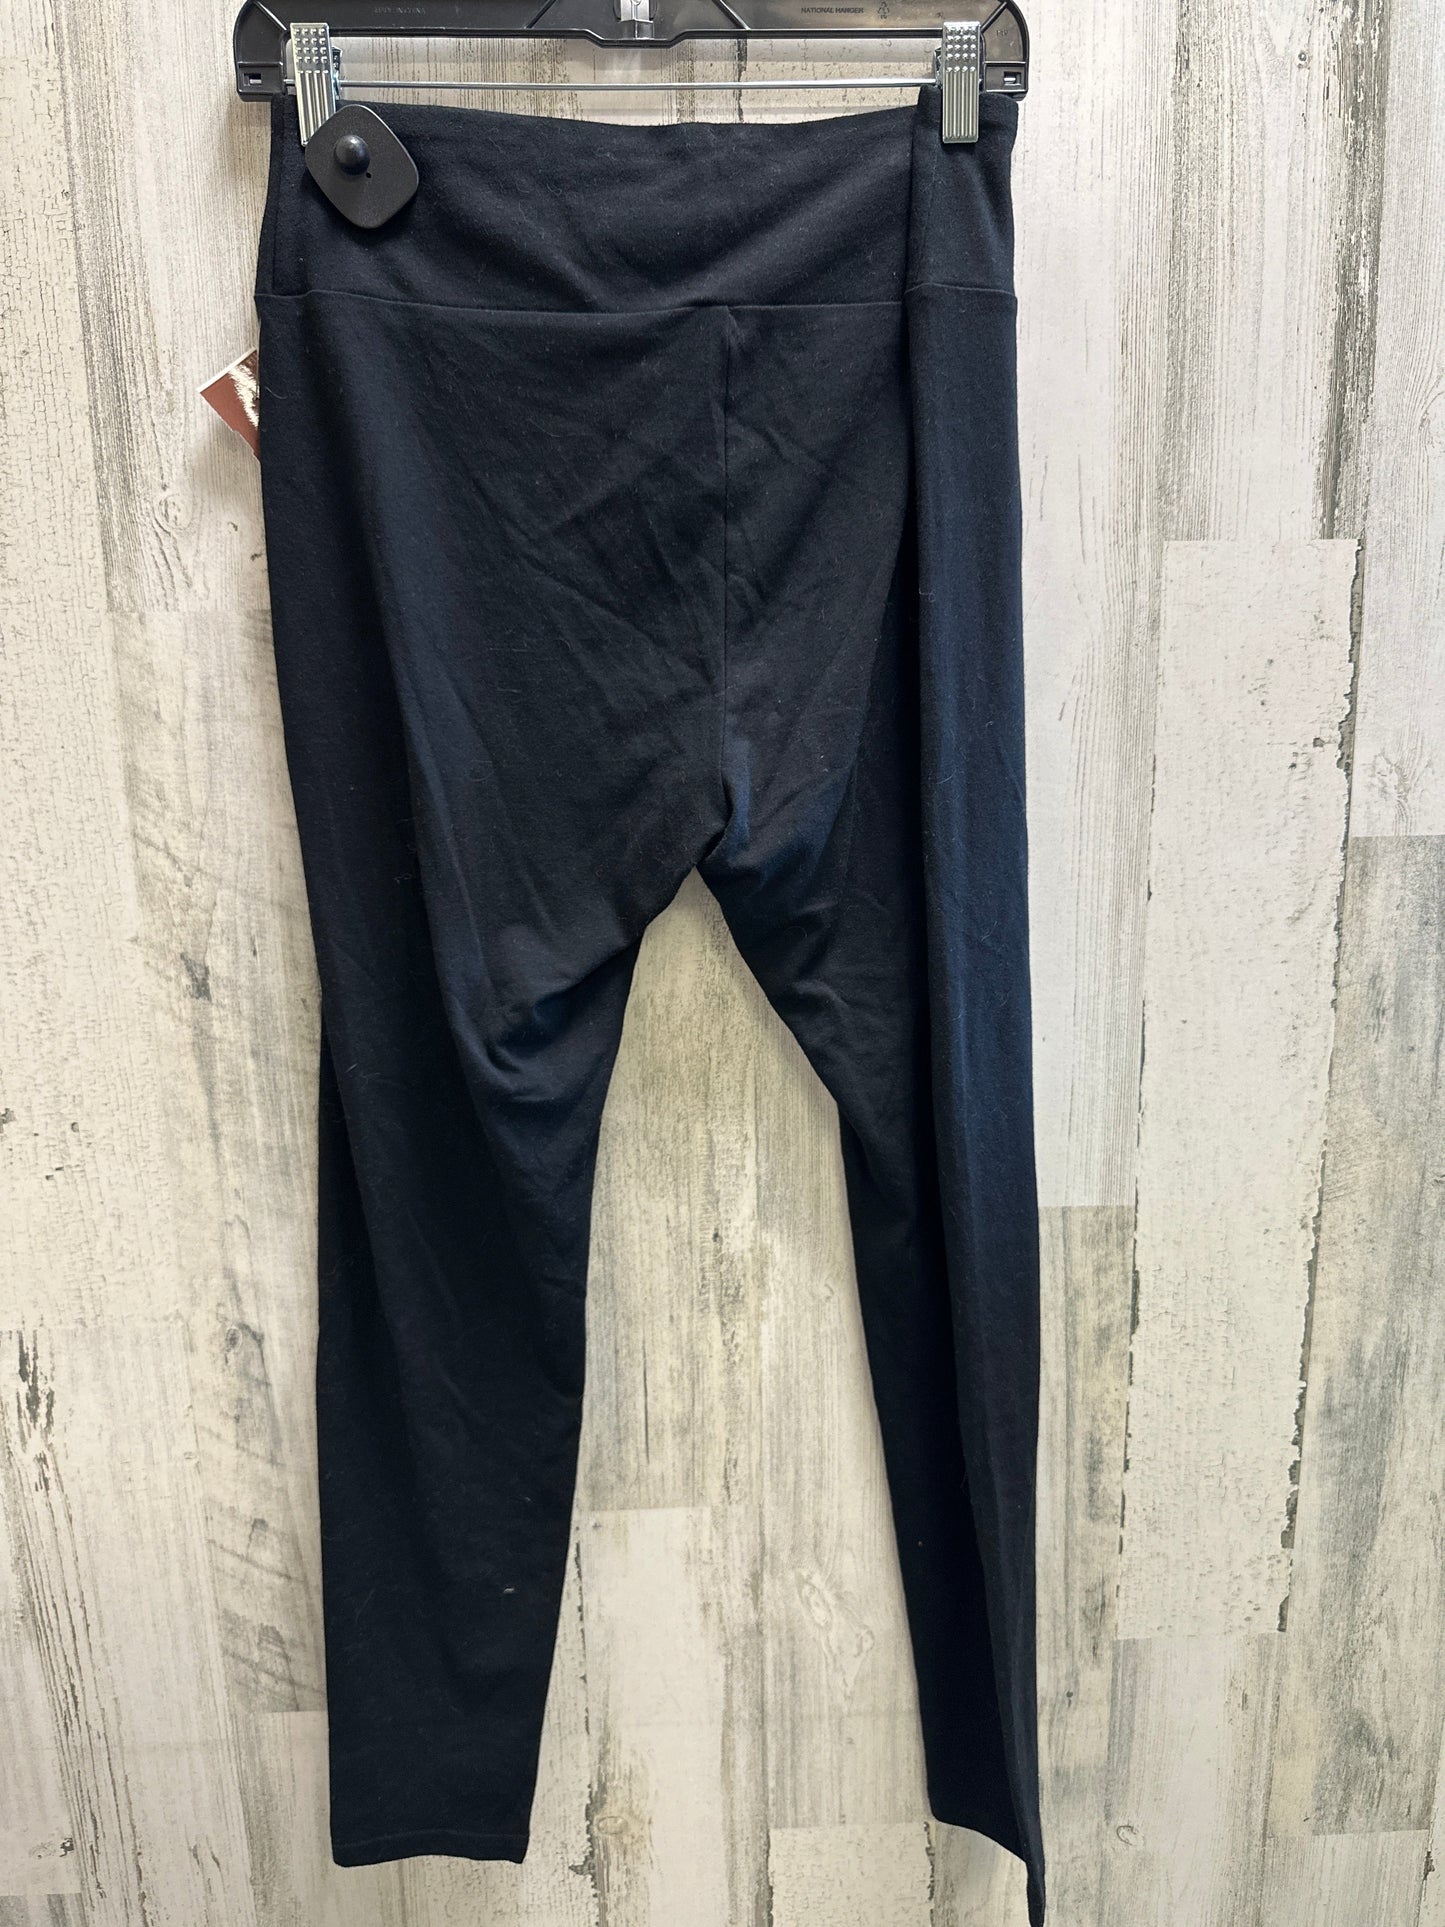 Athletic Leggings By Wild Fable  Size: L